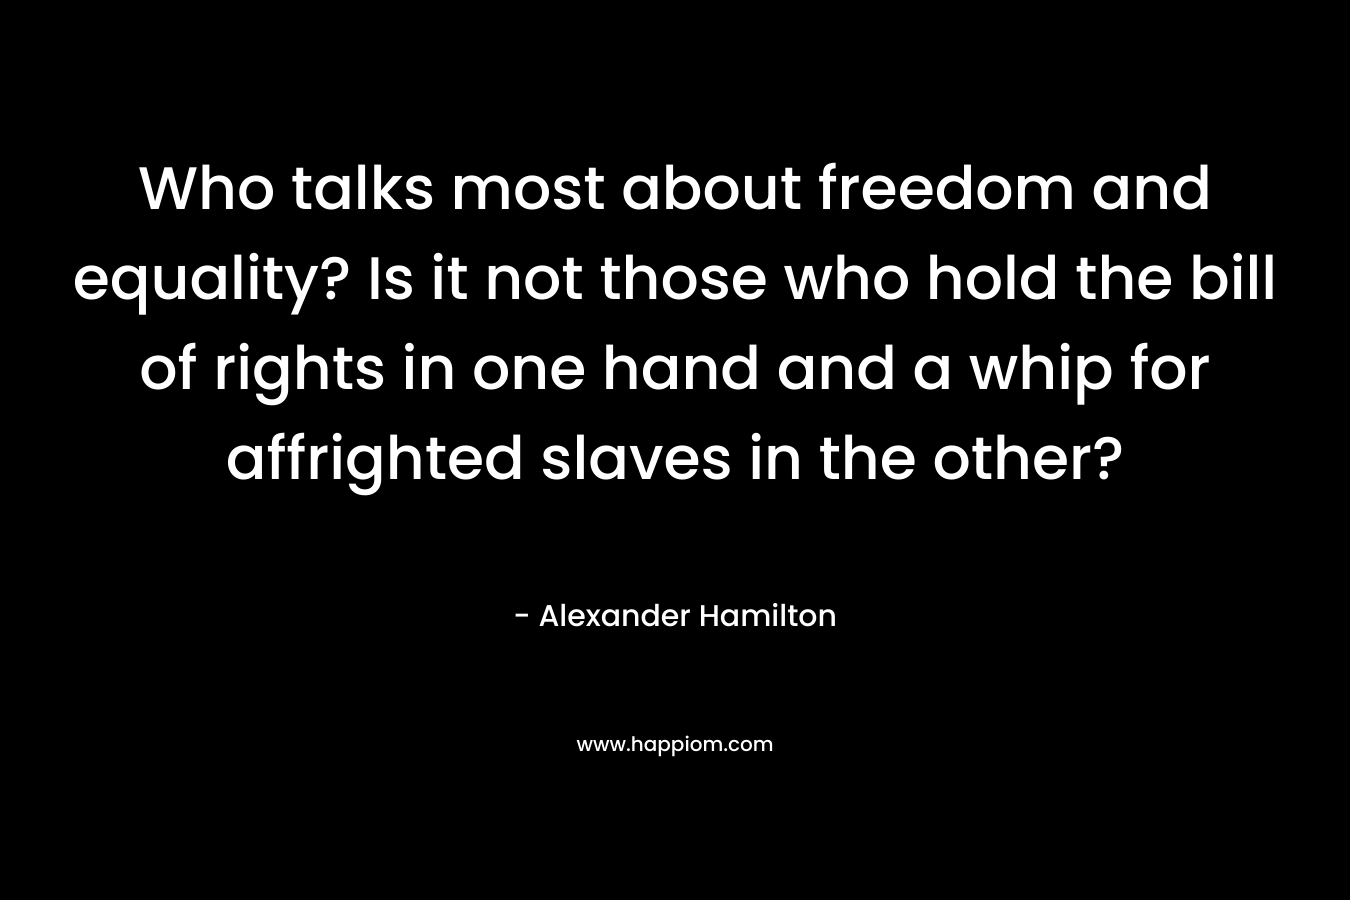 Who talks most about freedom and equality? Is it not those who hold the bill of rights in one hand and a whip for affrighted slaves in the other? – Alexander Hamilton